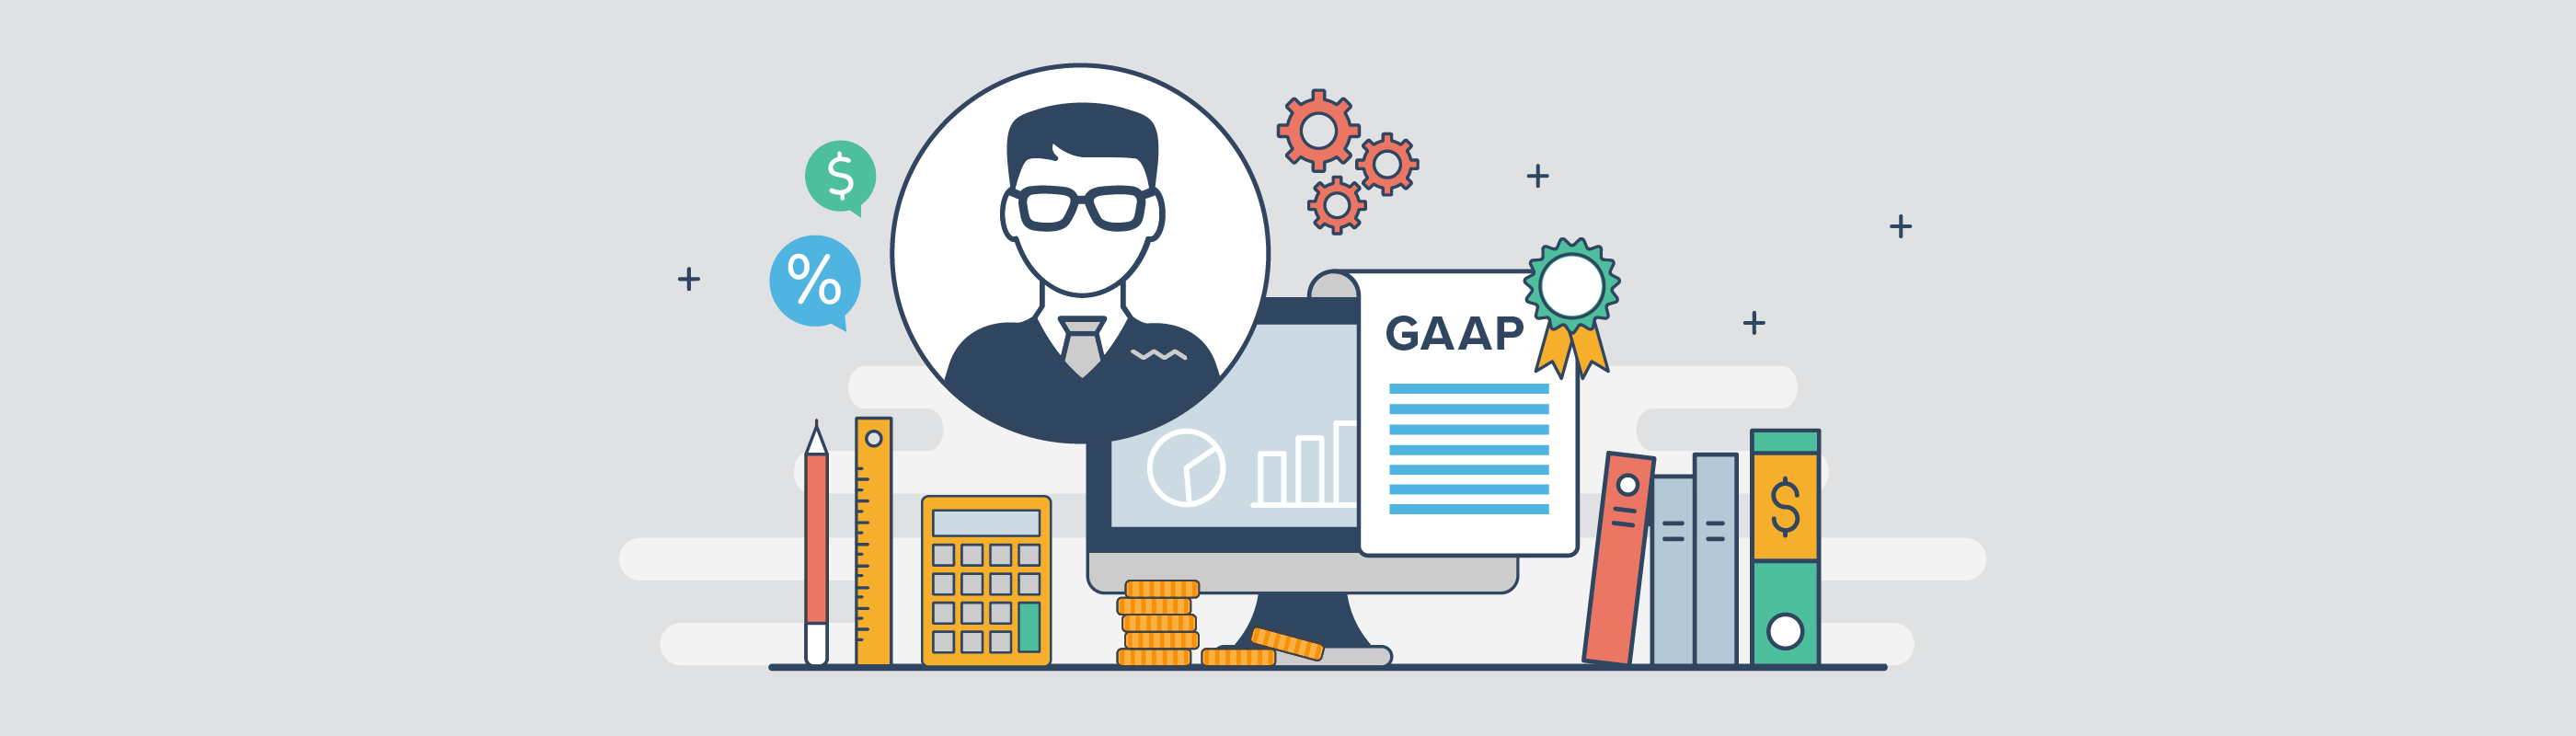 Why Startups Must Comply With Gaap 17753fe021af283536bd08673b48fb9eac162c07dee9aaa65921cbb317d5d289